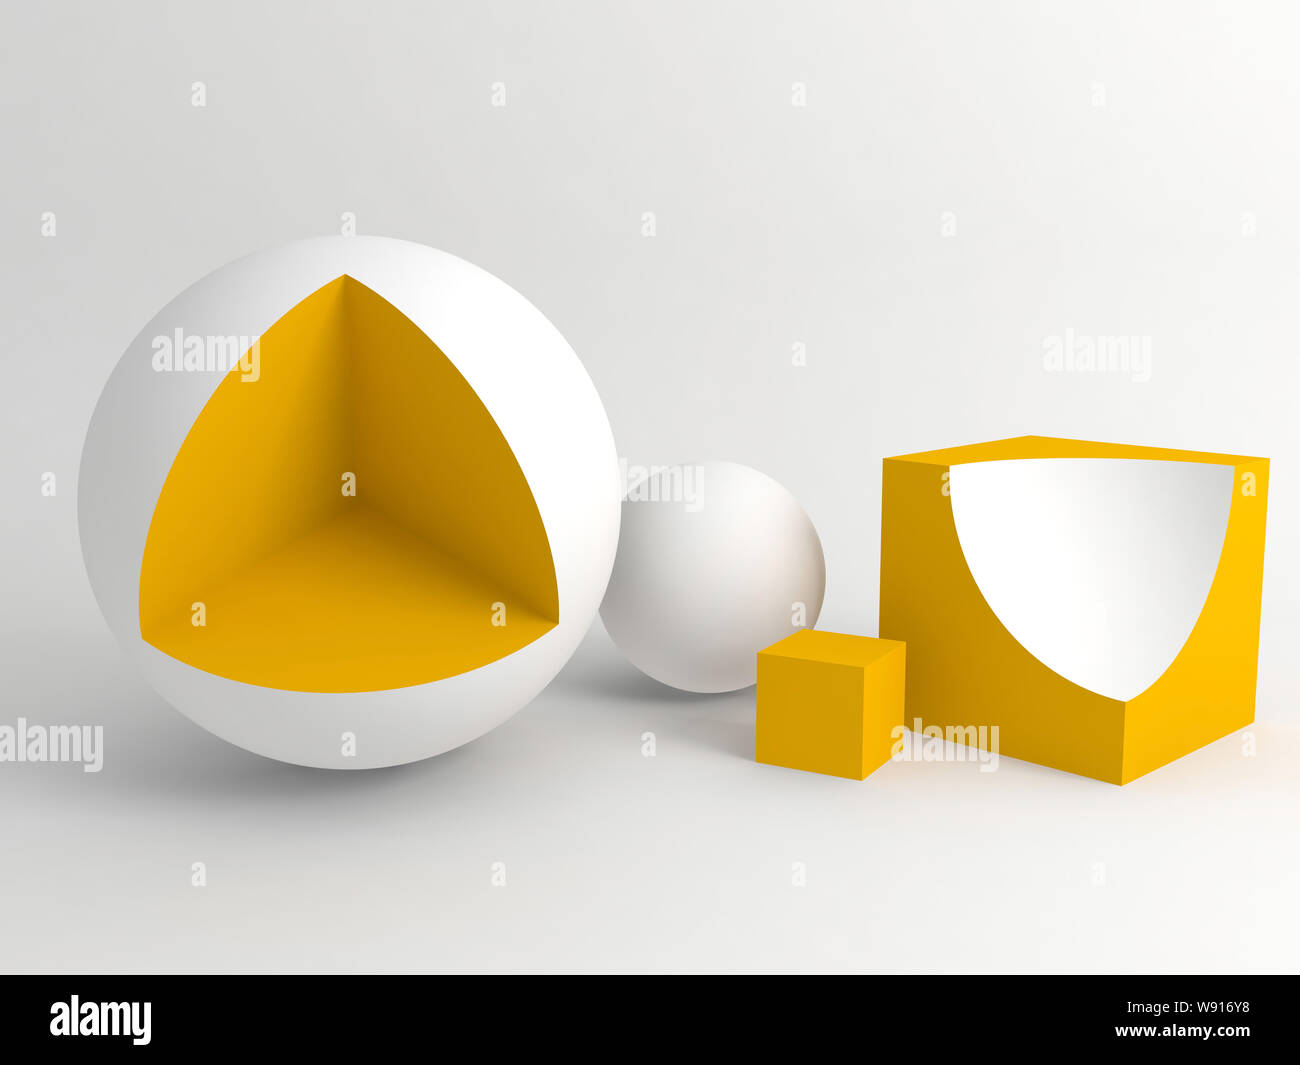 Abstract digital still life installation with yellow white geometric shapes over white soft shaded background. Subtract Boolean operation illustration Stock Photo